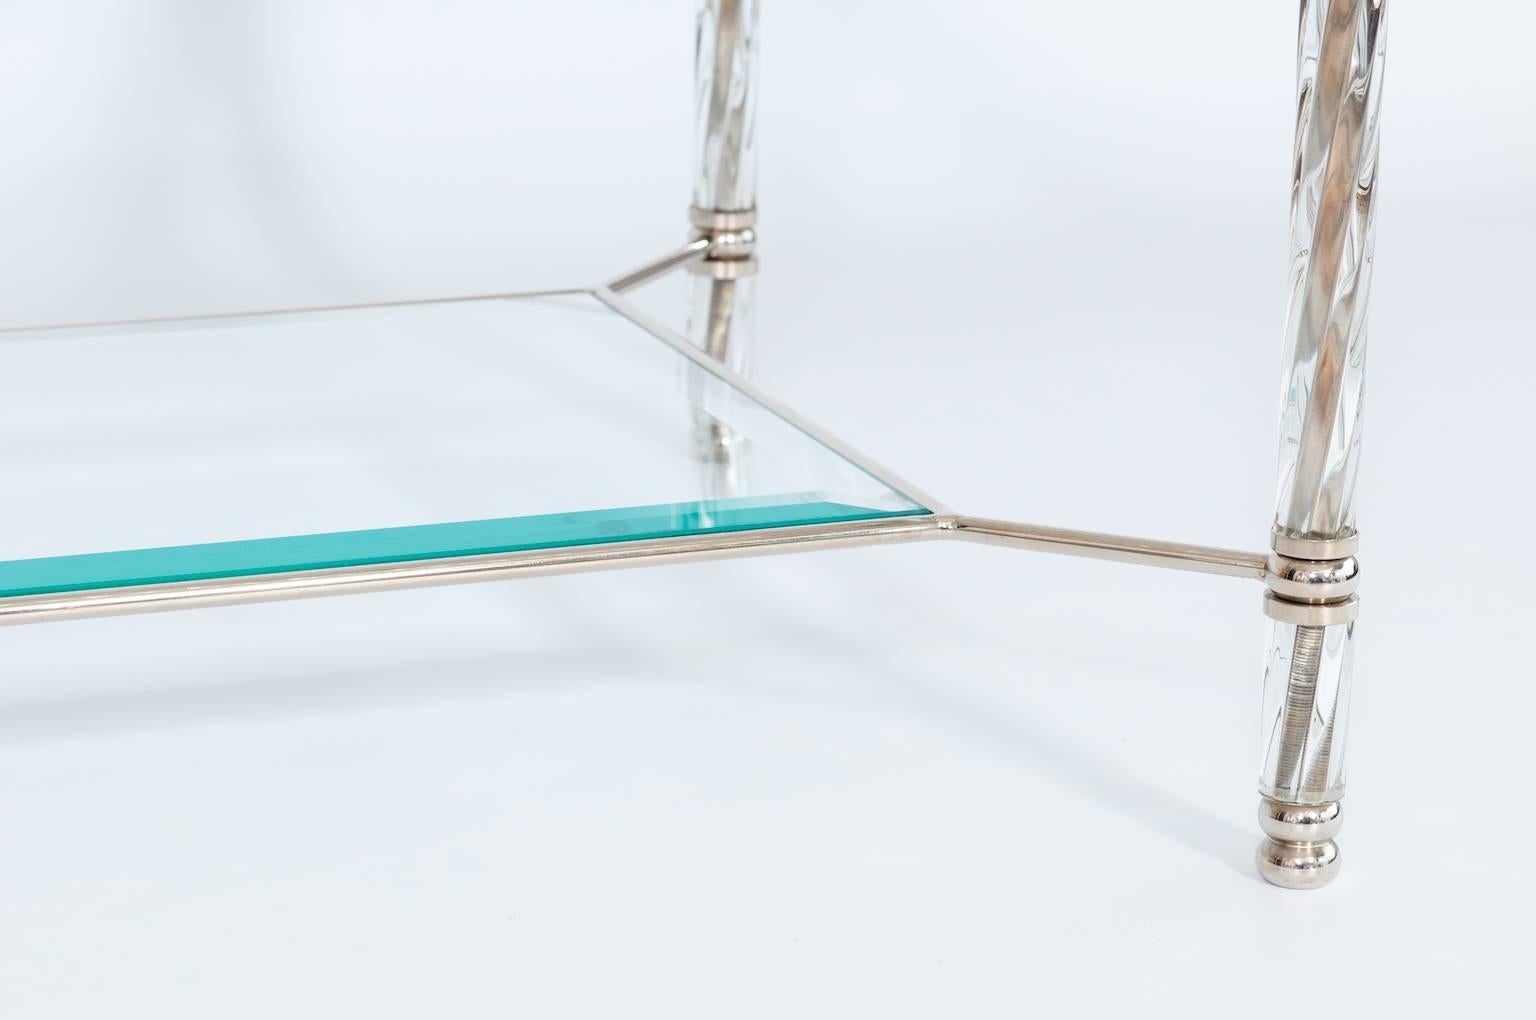 Hand-Crafted Italian Venetian Coffe Table in Blown Murano Glass, Transparent, Barovier, 1980s For Sale